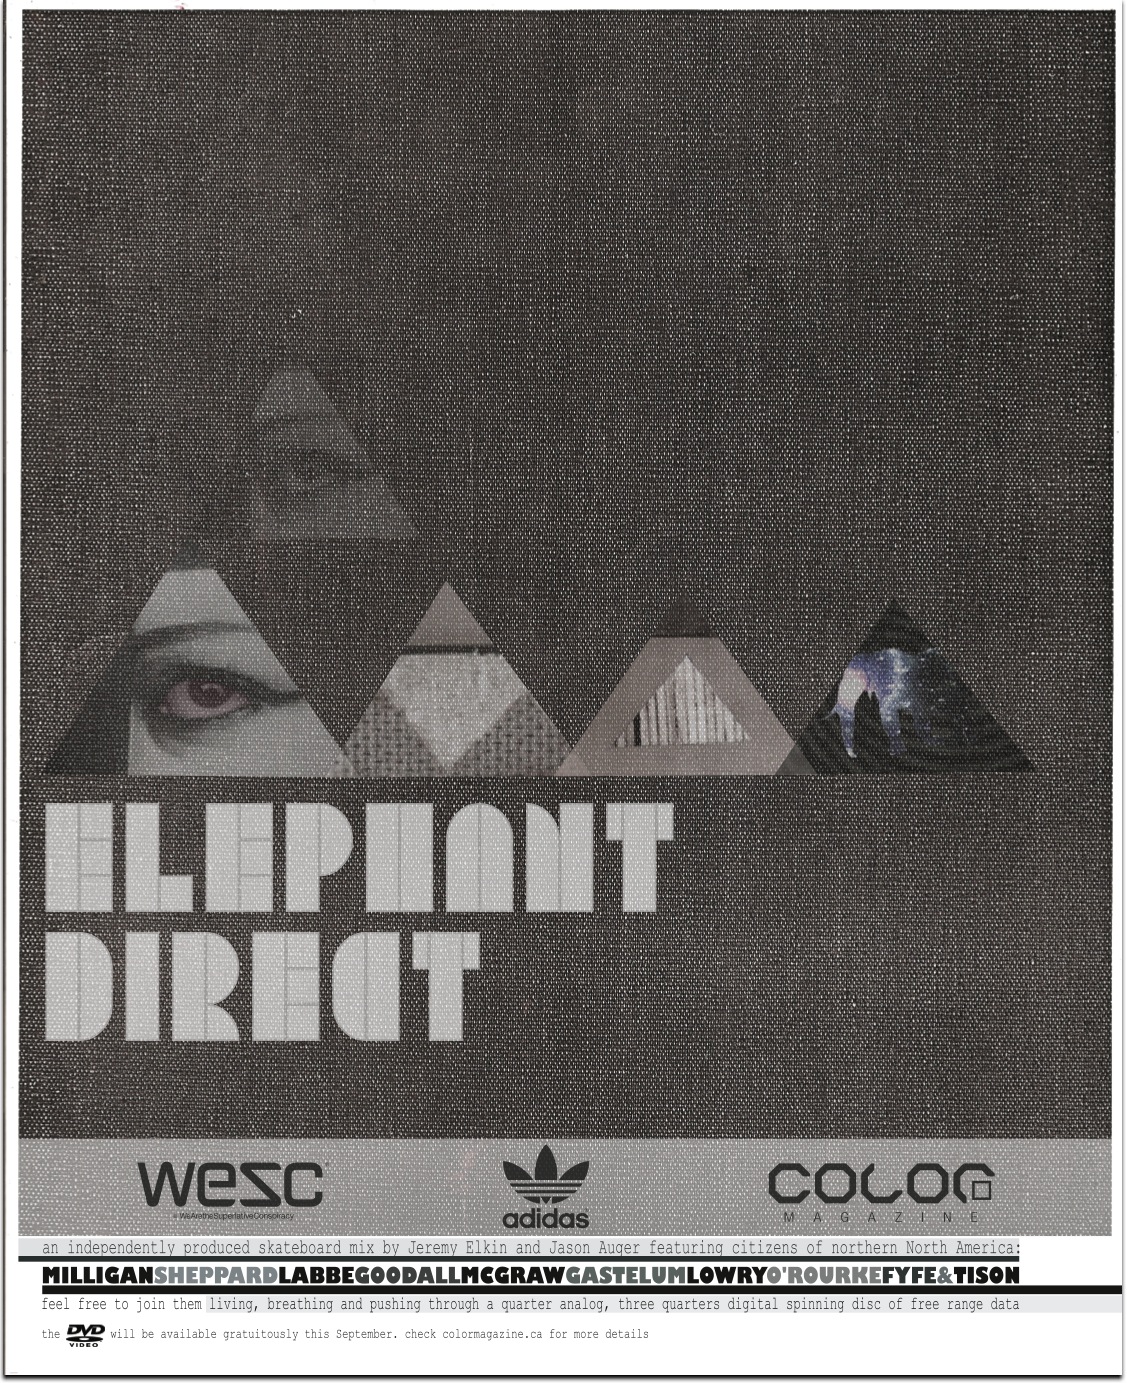 Elephant Direct cover